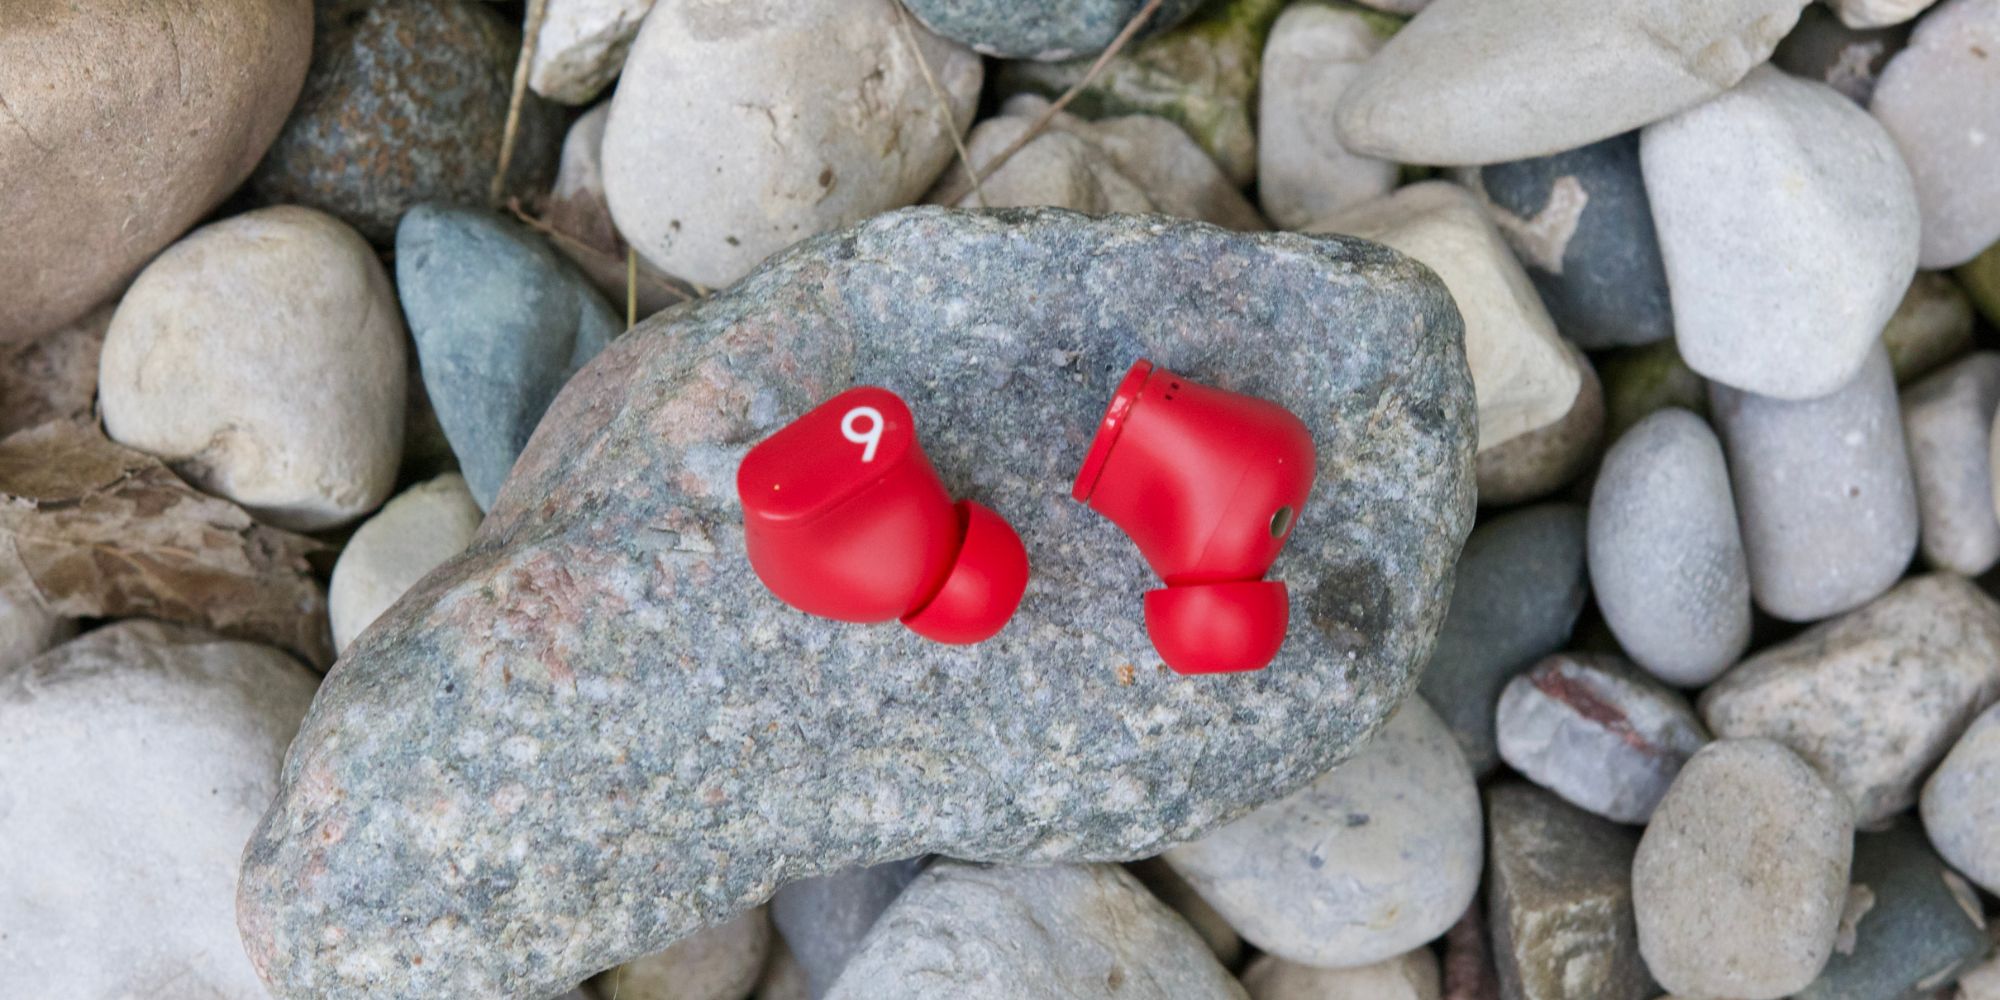 Beats Studio Buds Review Better (And Cheaper) Than AirPods